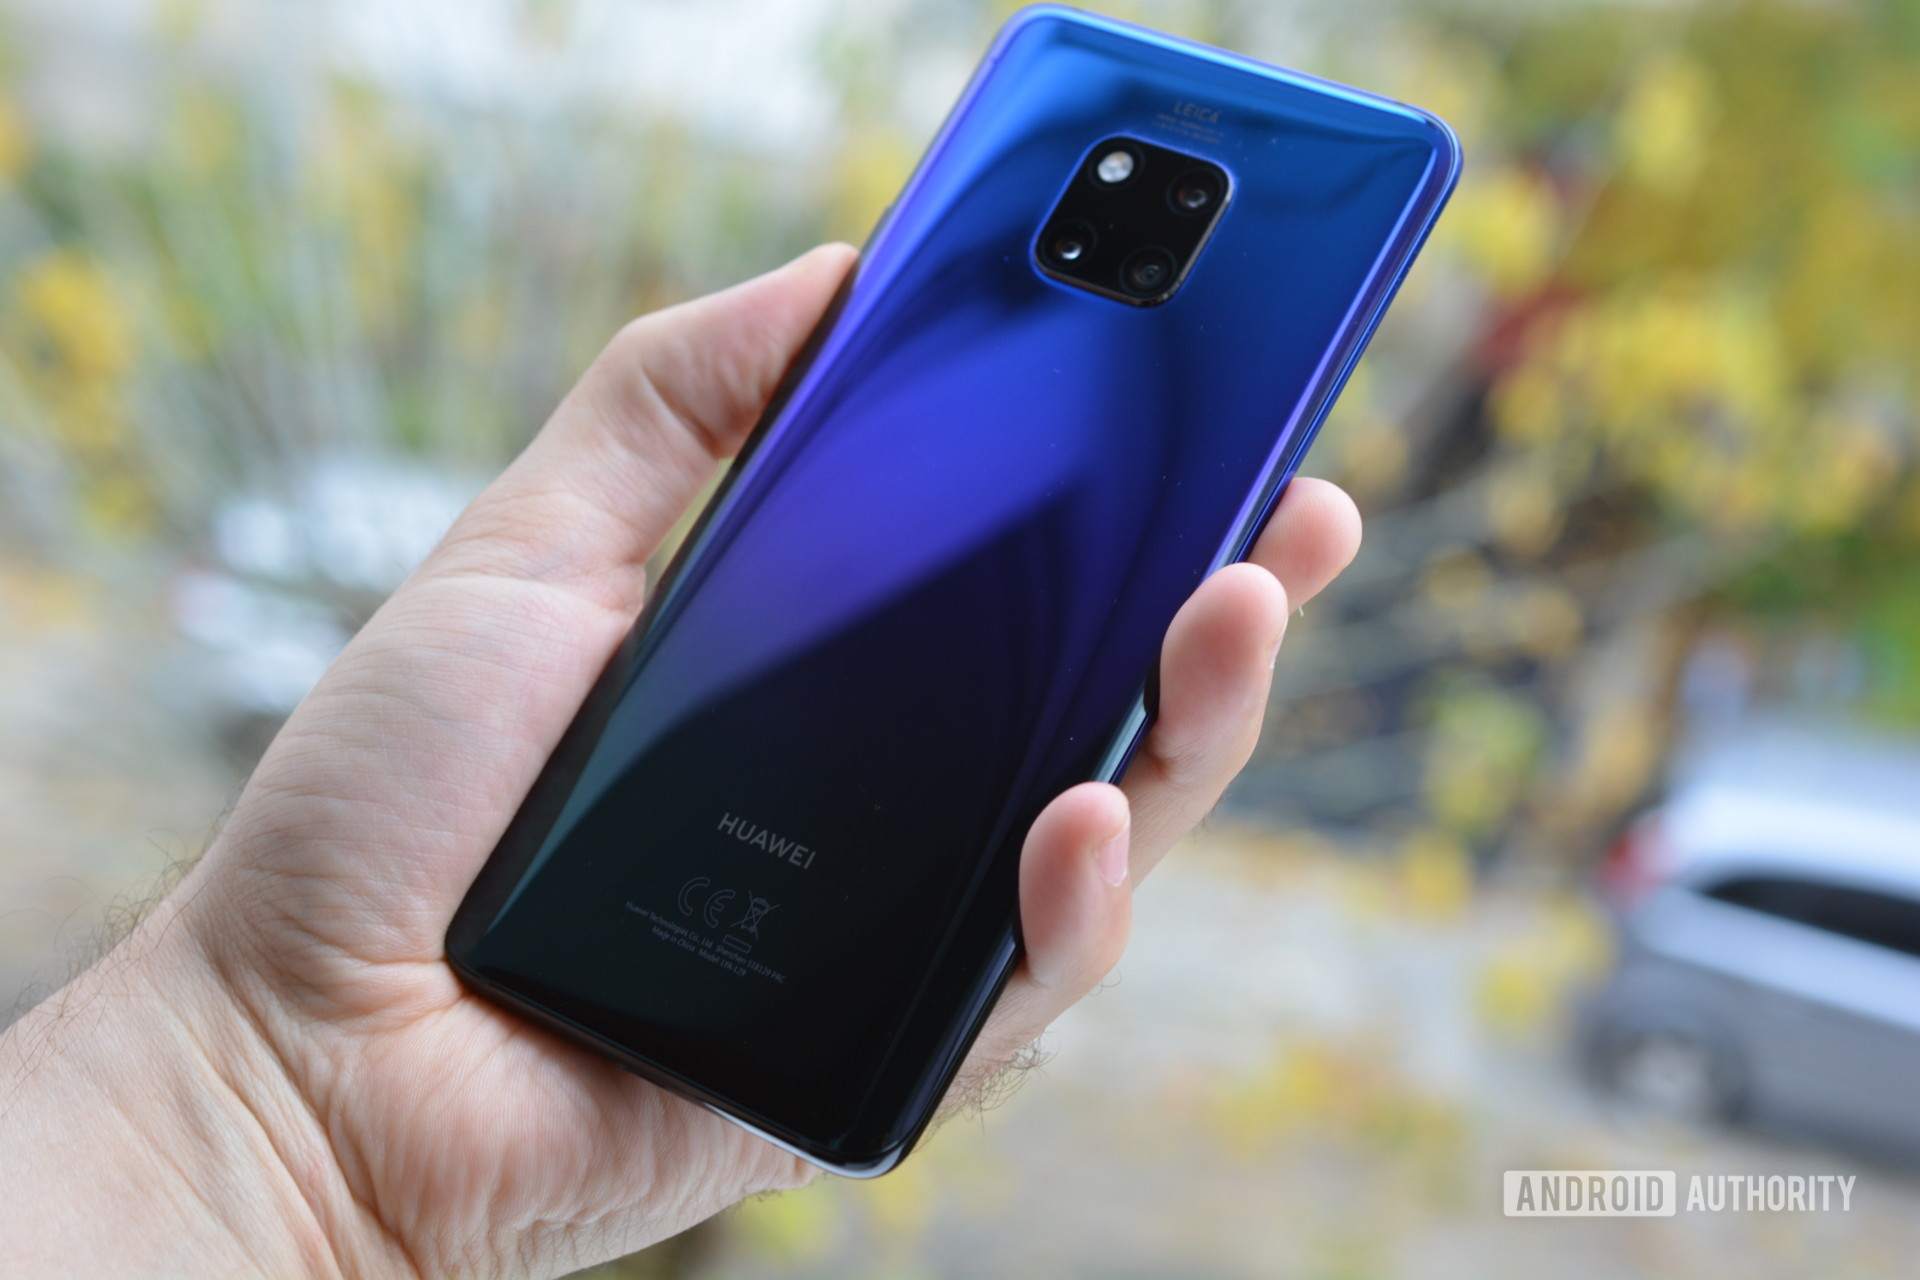 Pelgrim over het algemeen resterend HUAWEI Mate 20 Pro review: The best phone for power users